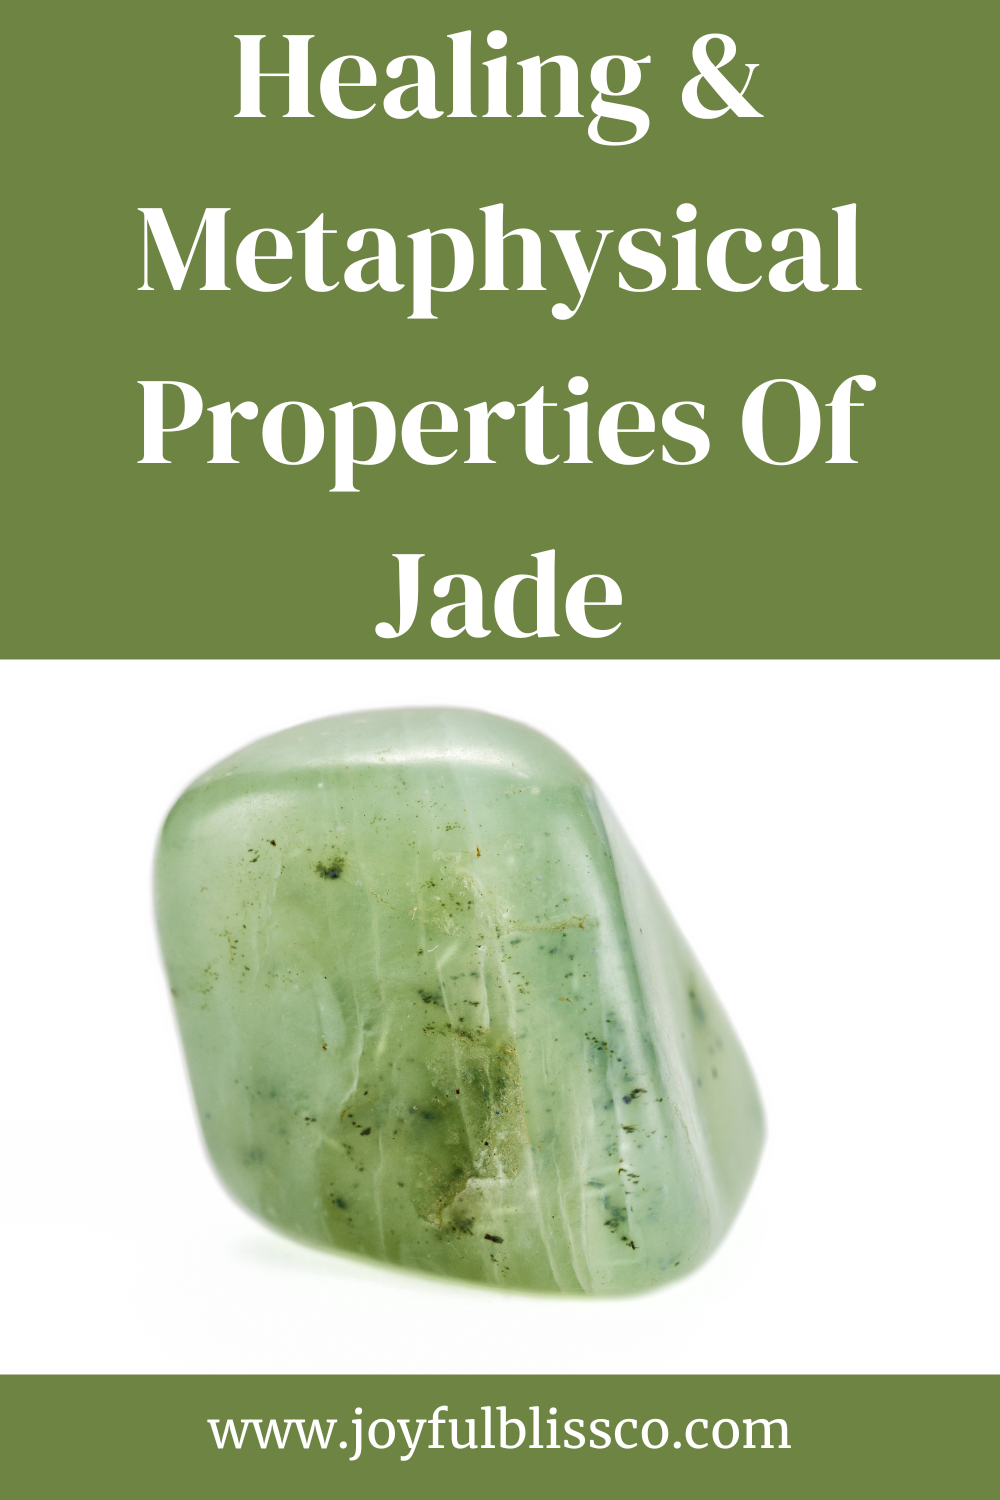 The Healing And Metaphysical Properties Of Jade